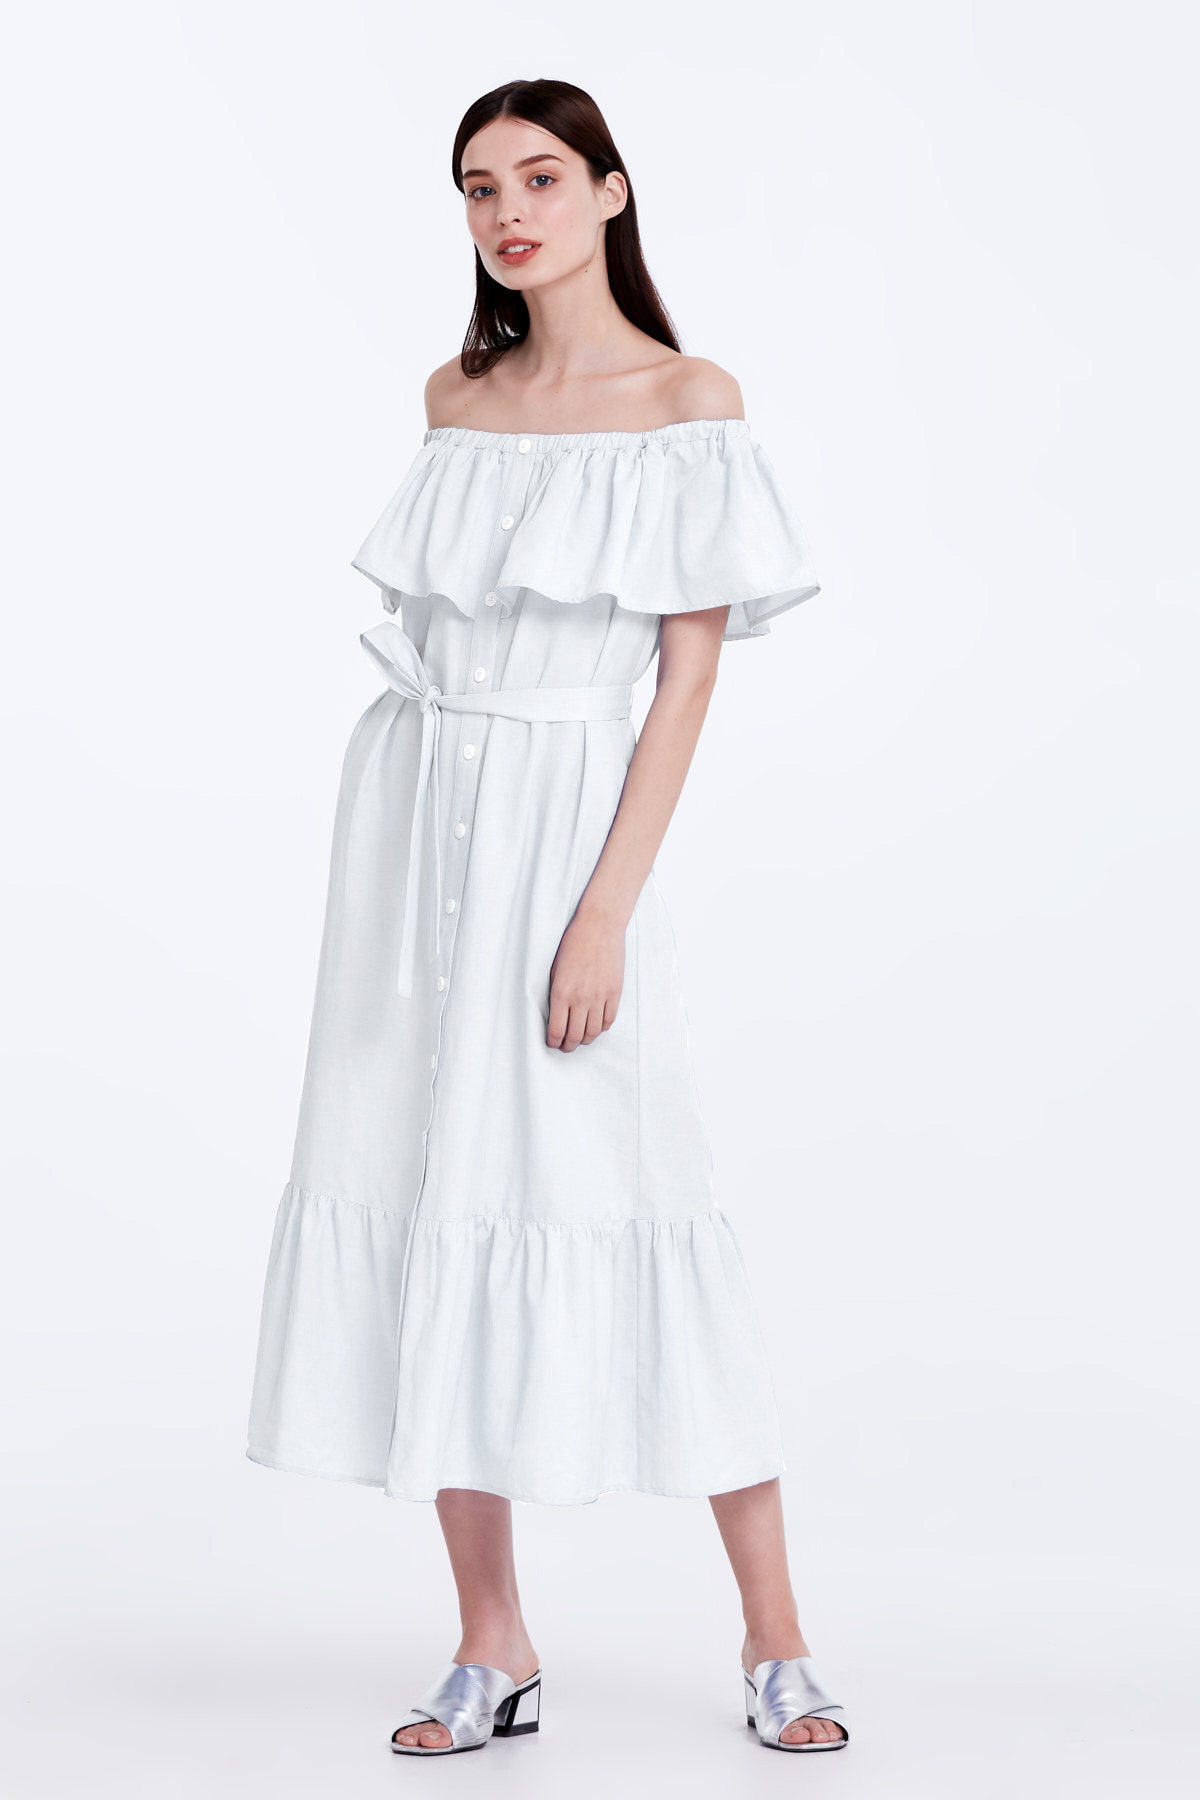 Off-shoulder white dress with a flounce , photo 5